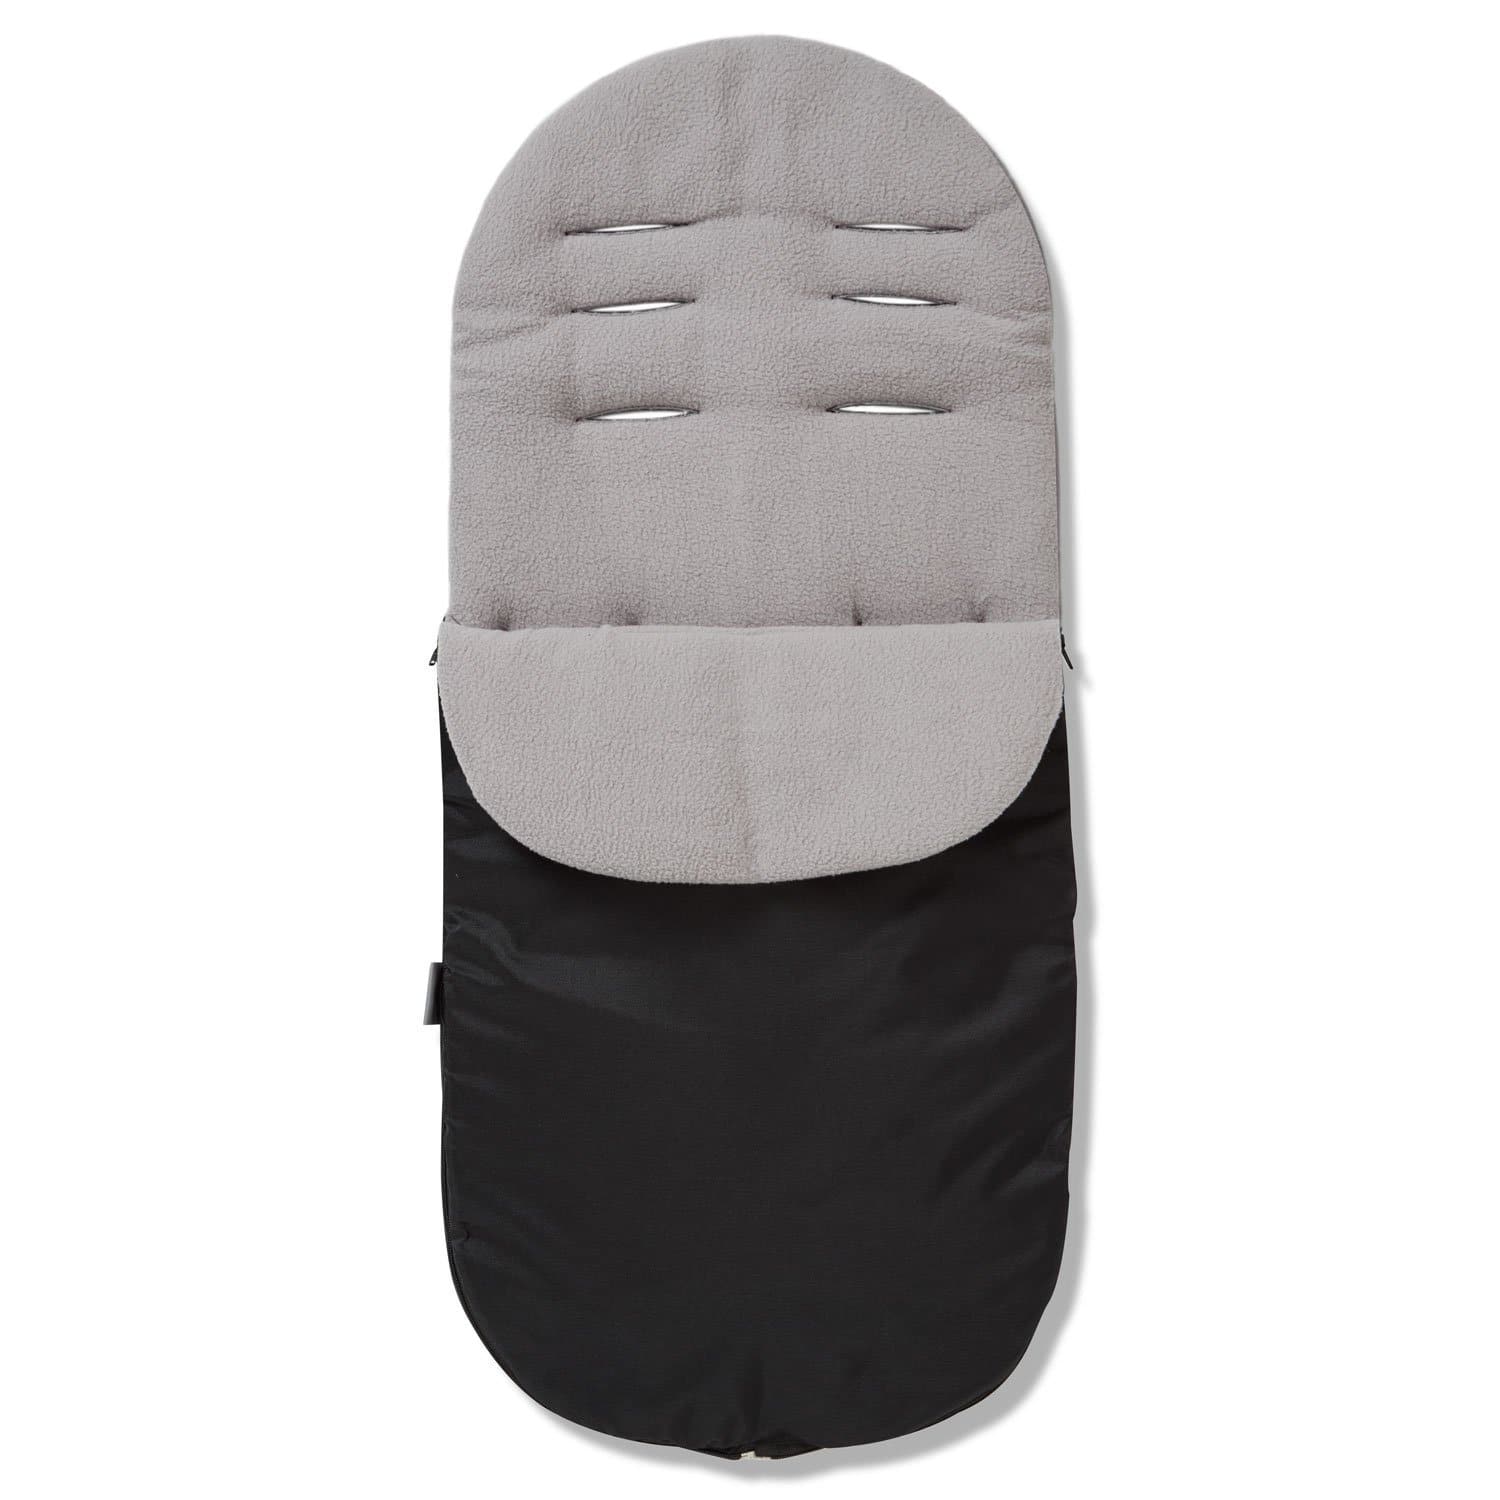 Footmuff / Cosy Toes Compatible with Seed - Grey / Fits All Models | For Your Little One